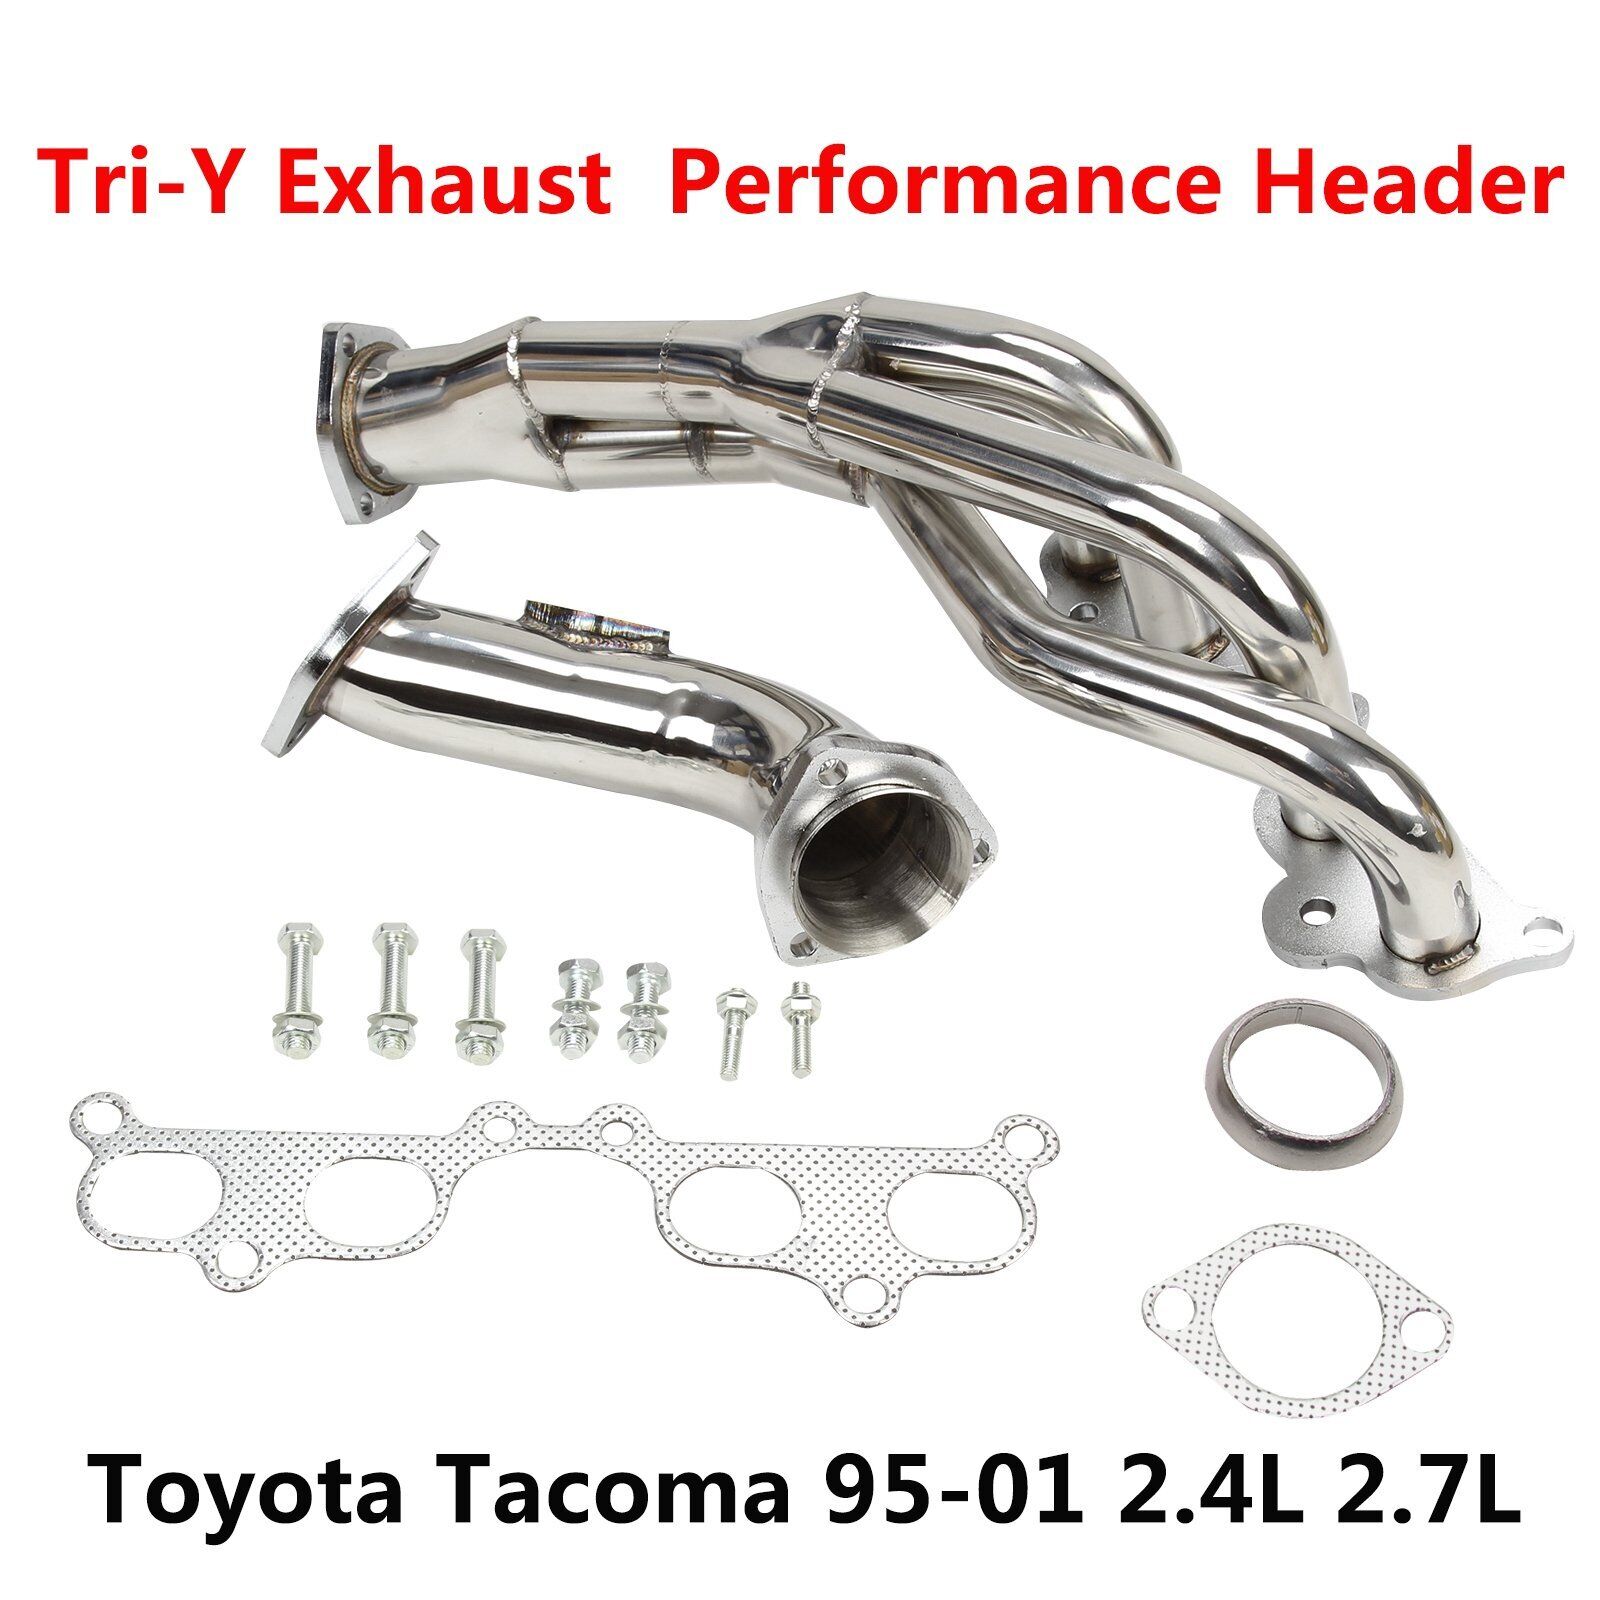 For 1995-2001 Toyota Tacoma 2.4L 2.7L L4 Stainless Steel Manifold Header NEW